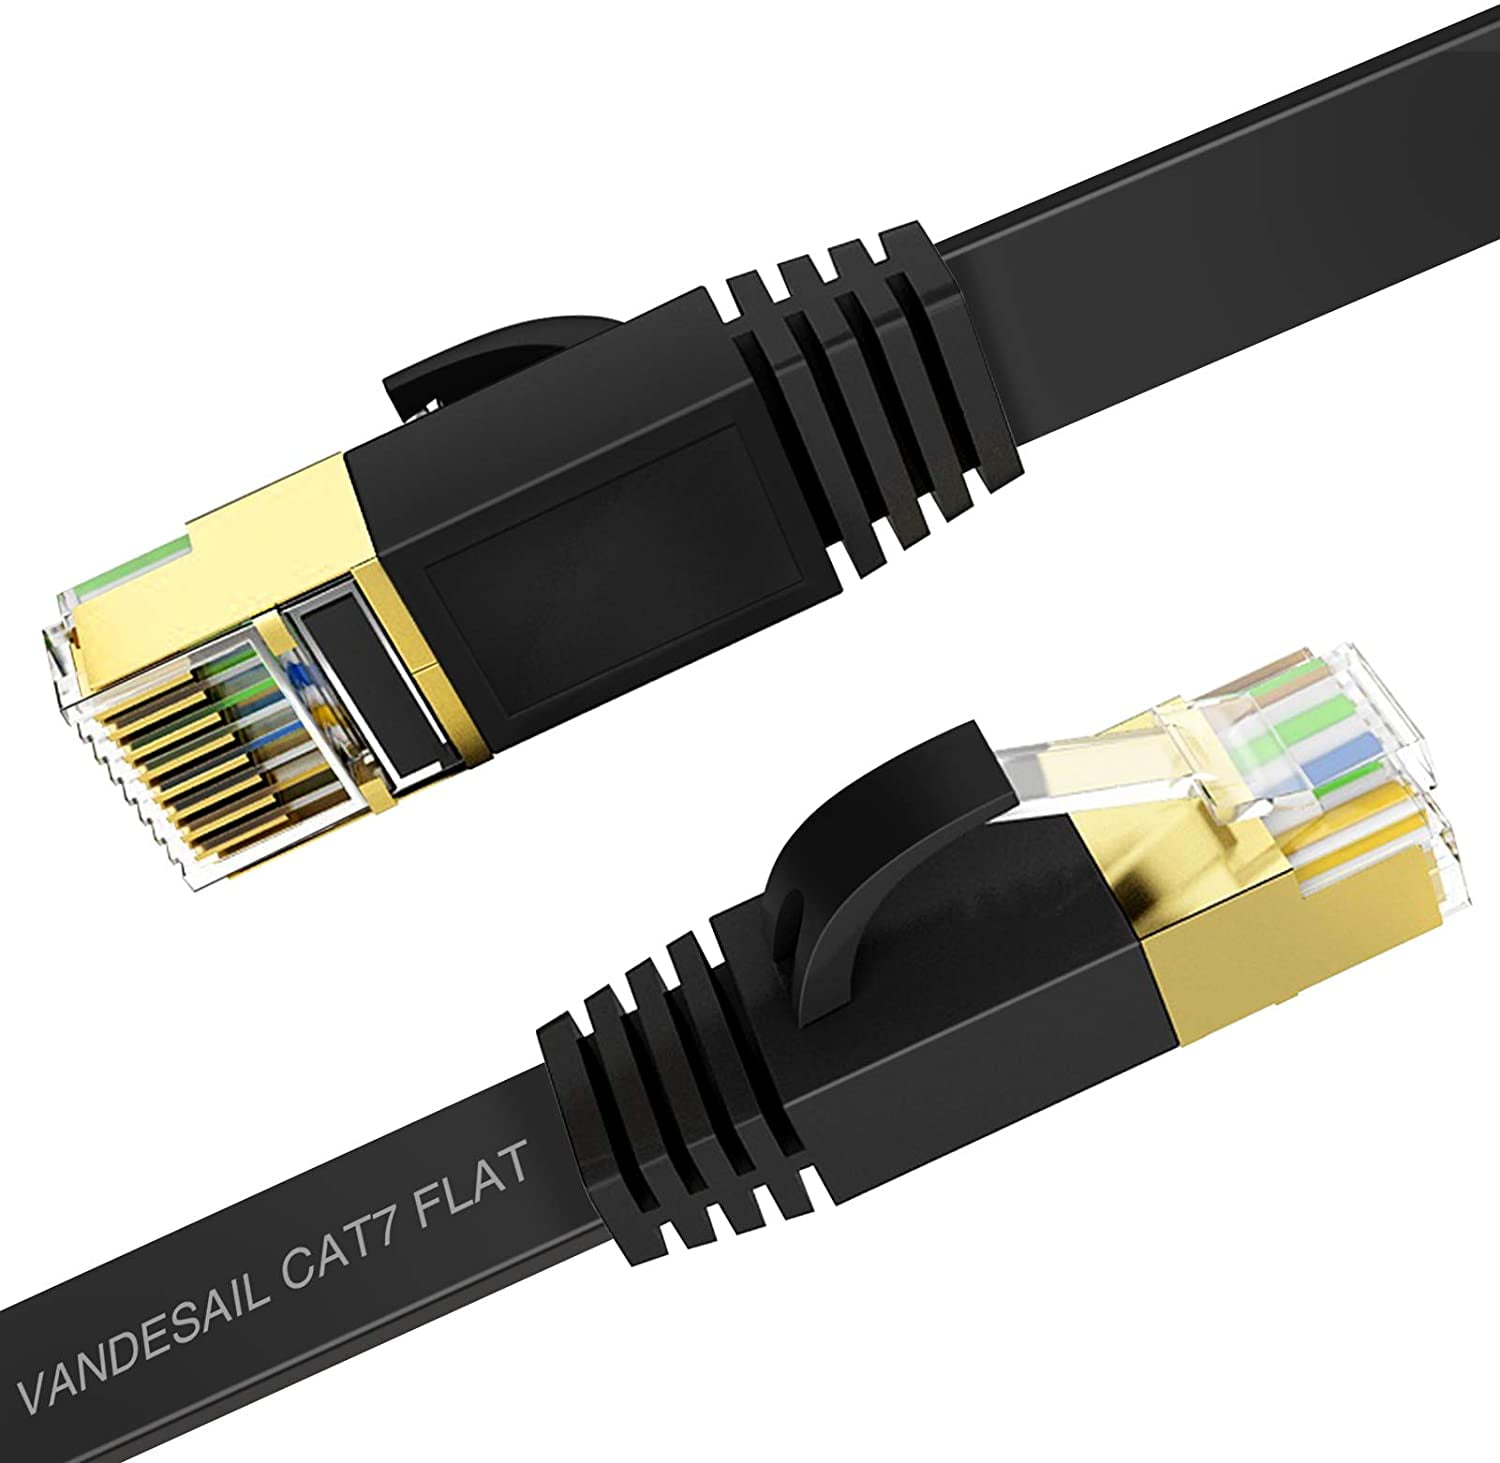 50FT S/FTP CAT 7 Gold Plated Shielded Ethernet RJ45 Copper Cable 10 Gigabit Ethernet Network Patch Cord Cat7 50ft, White 